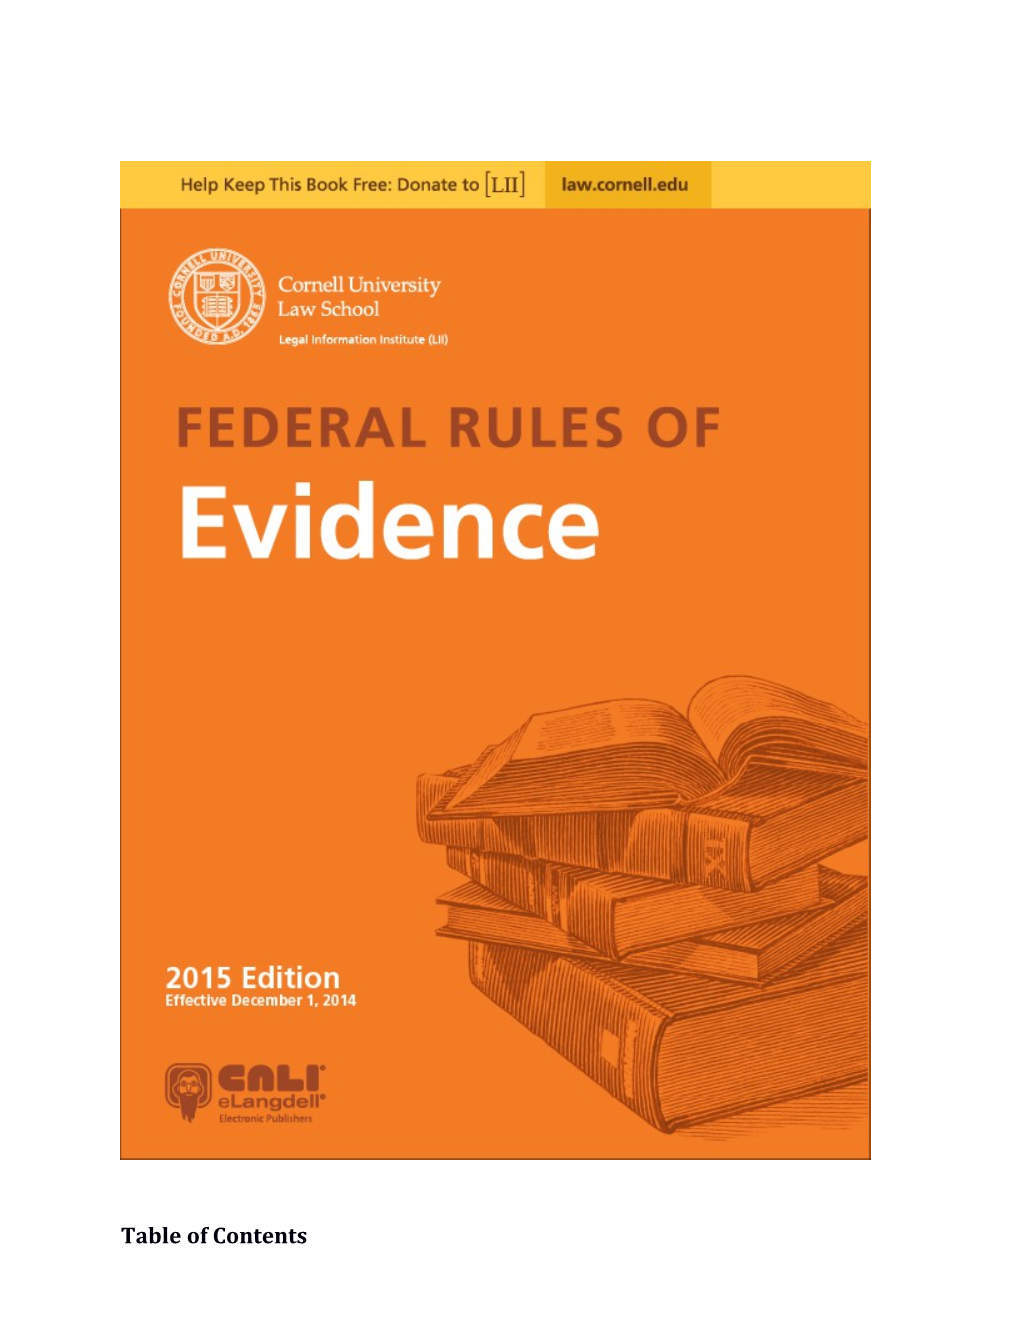 Federal Rules of Evidence, 2015 Edition